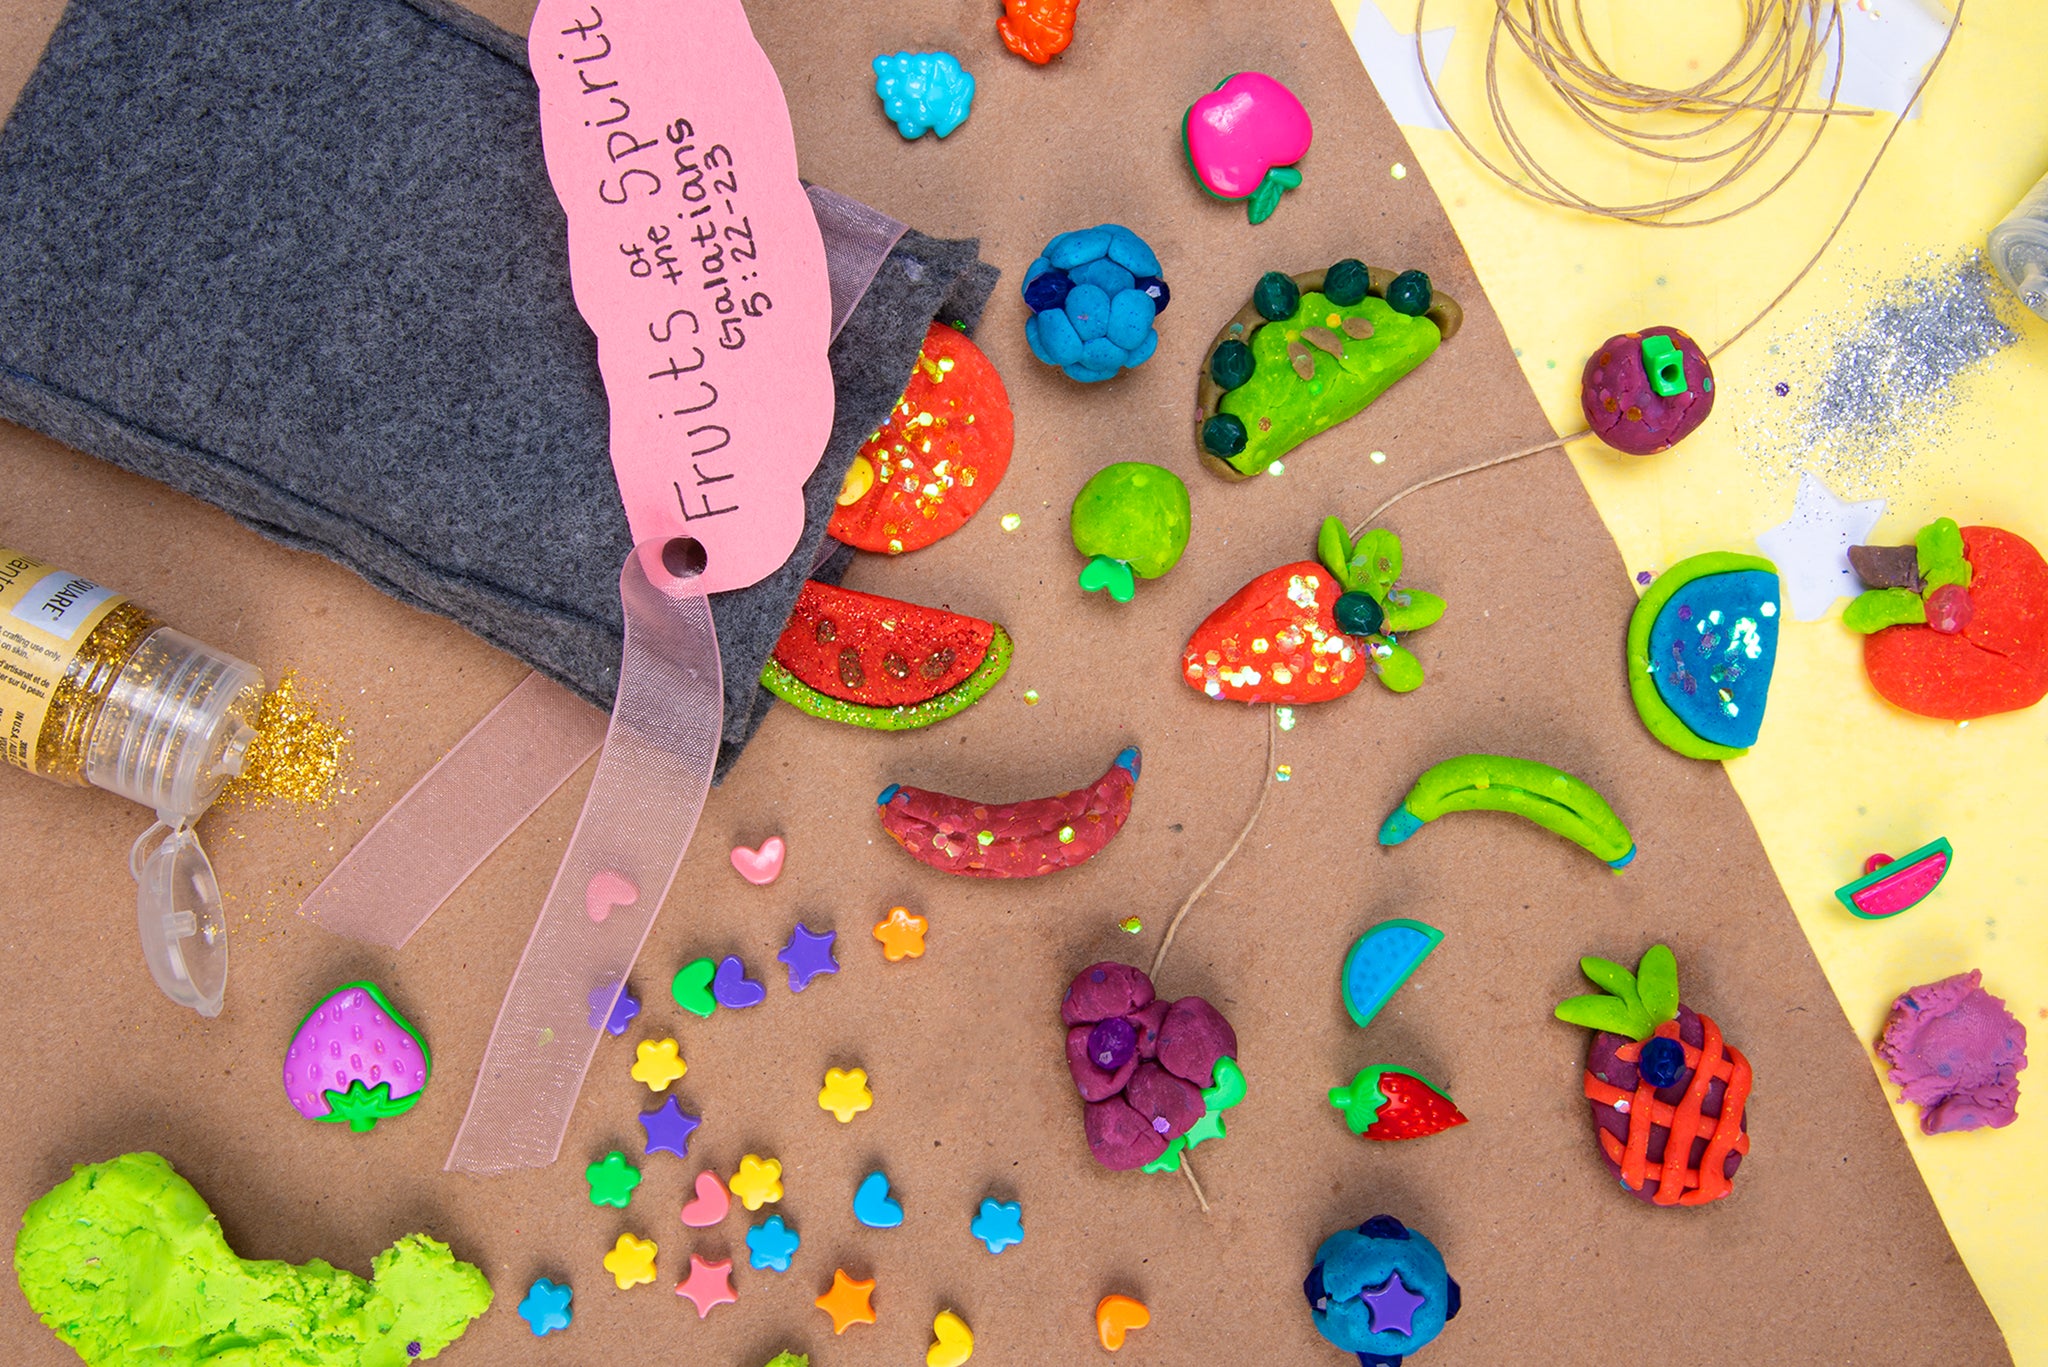 Cute closeup image of colorful, embellished fruit charms made with homemade air dry clay